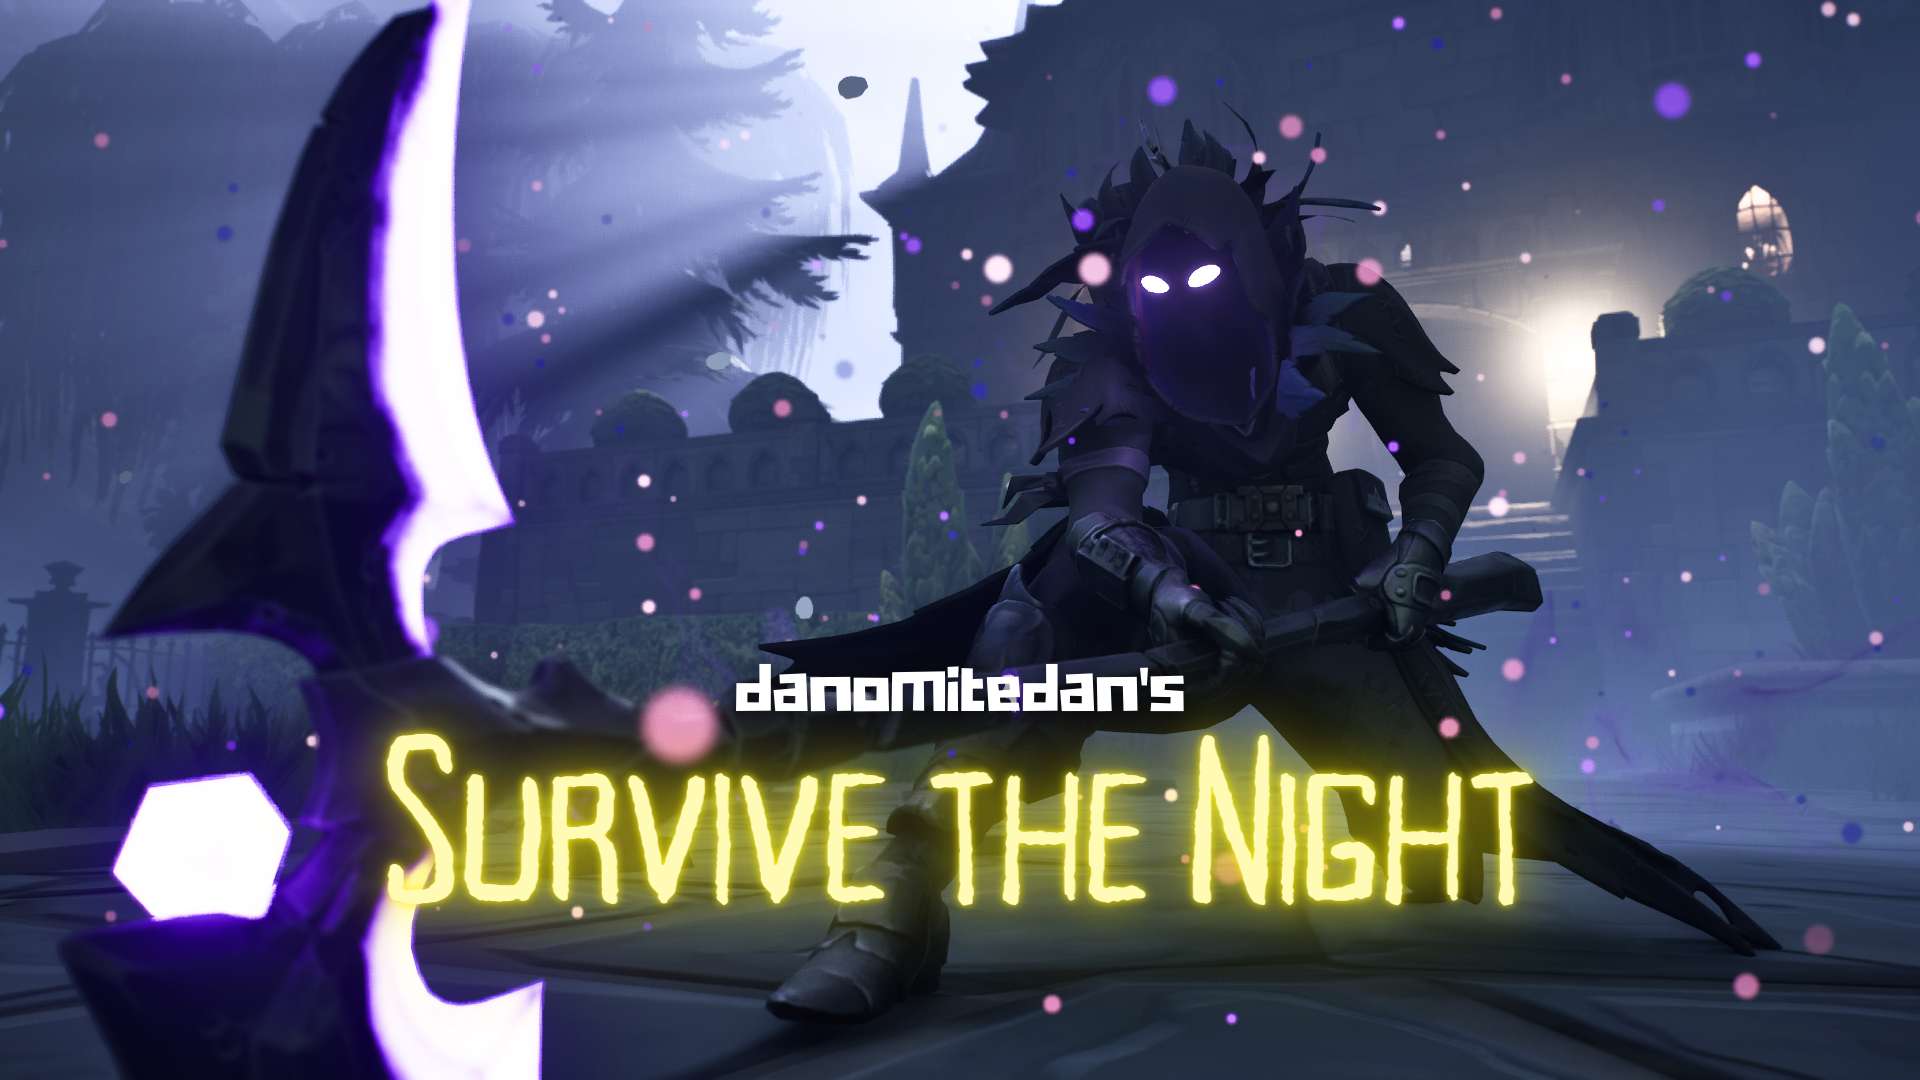 SURVIVE THE NIGHT